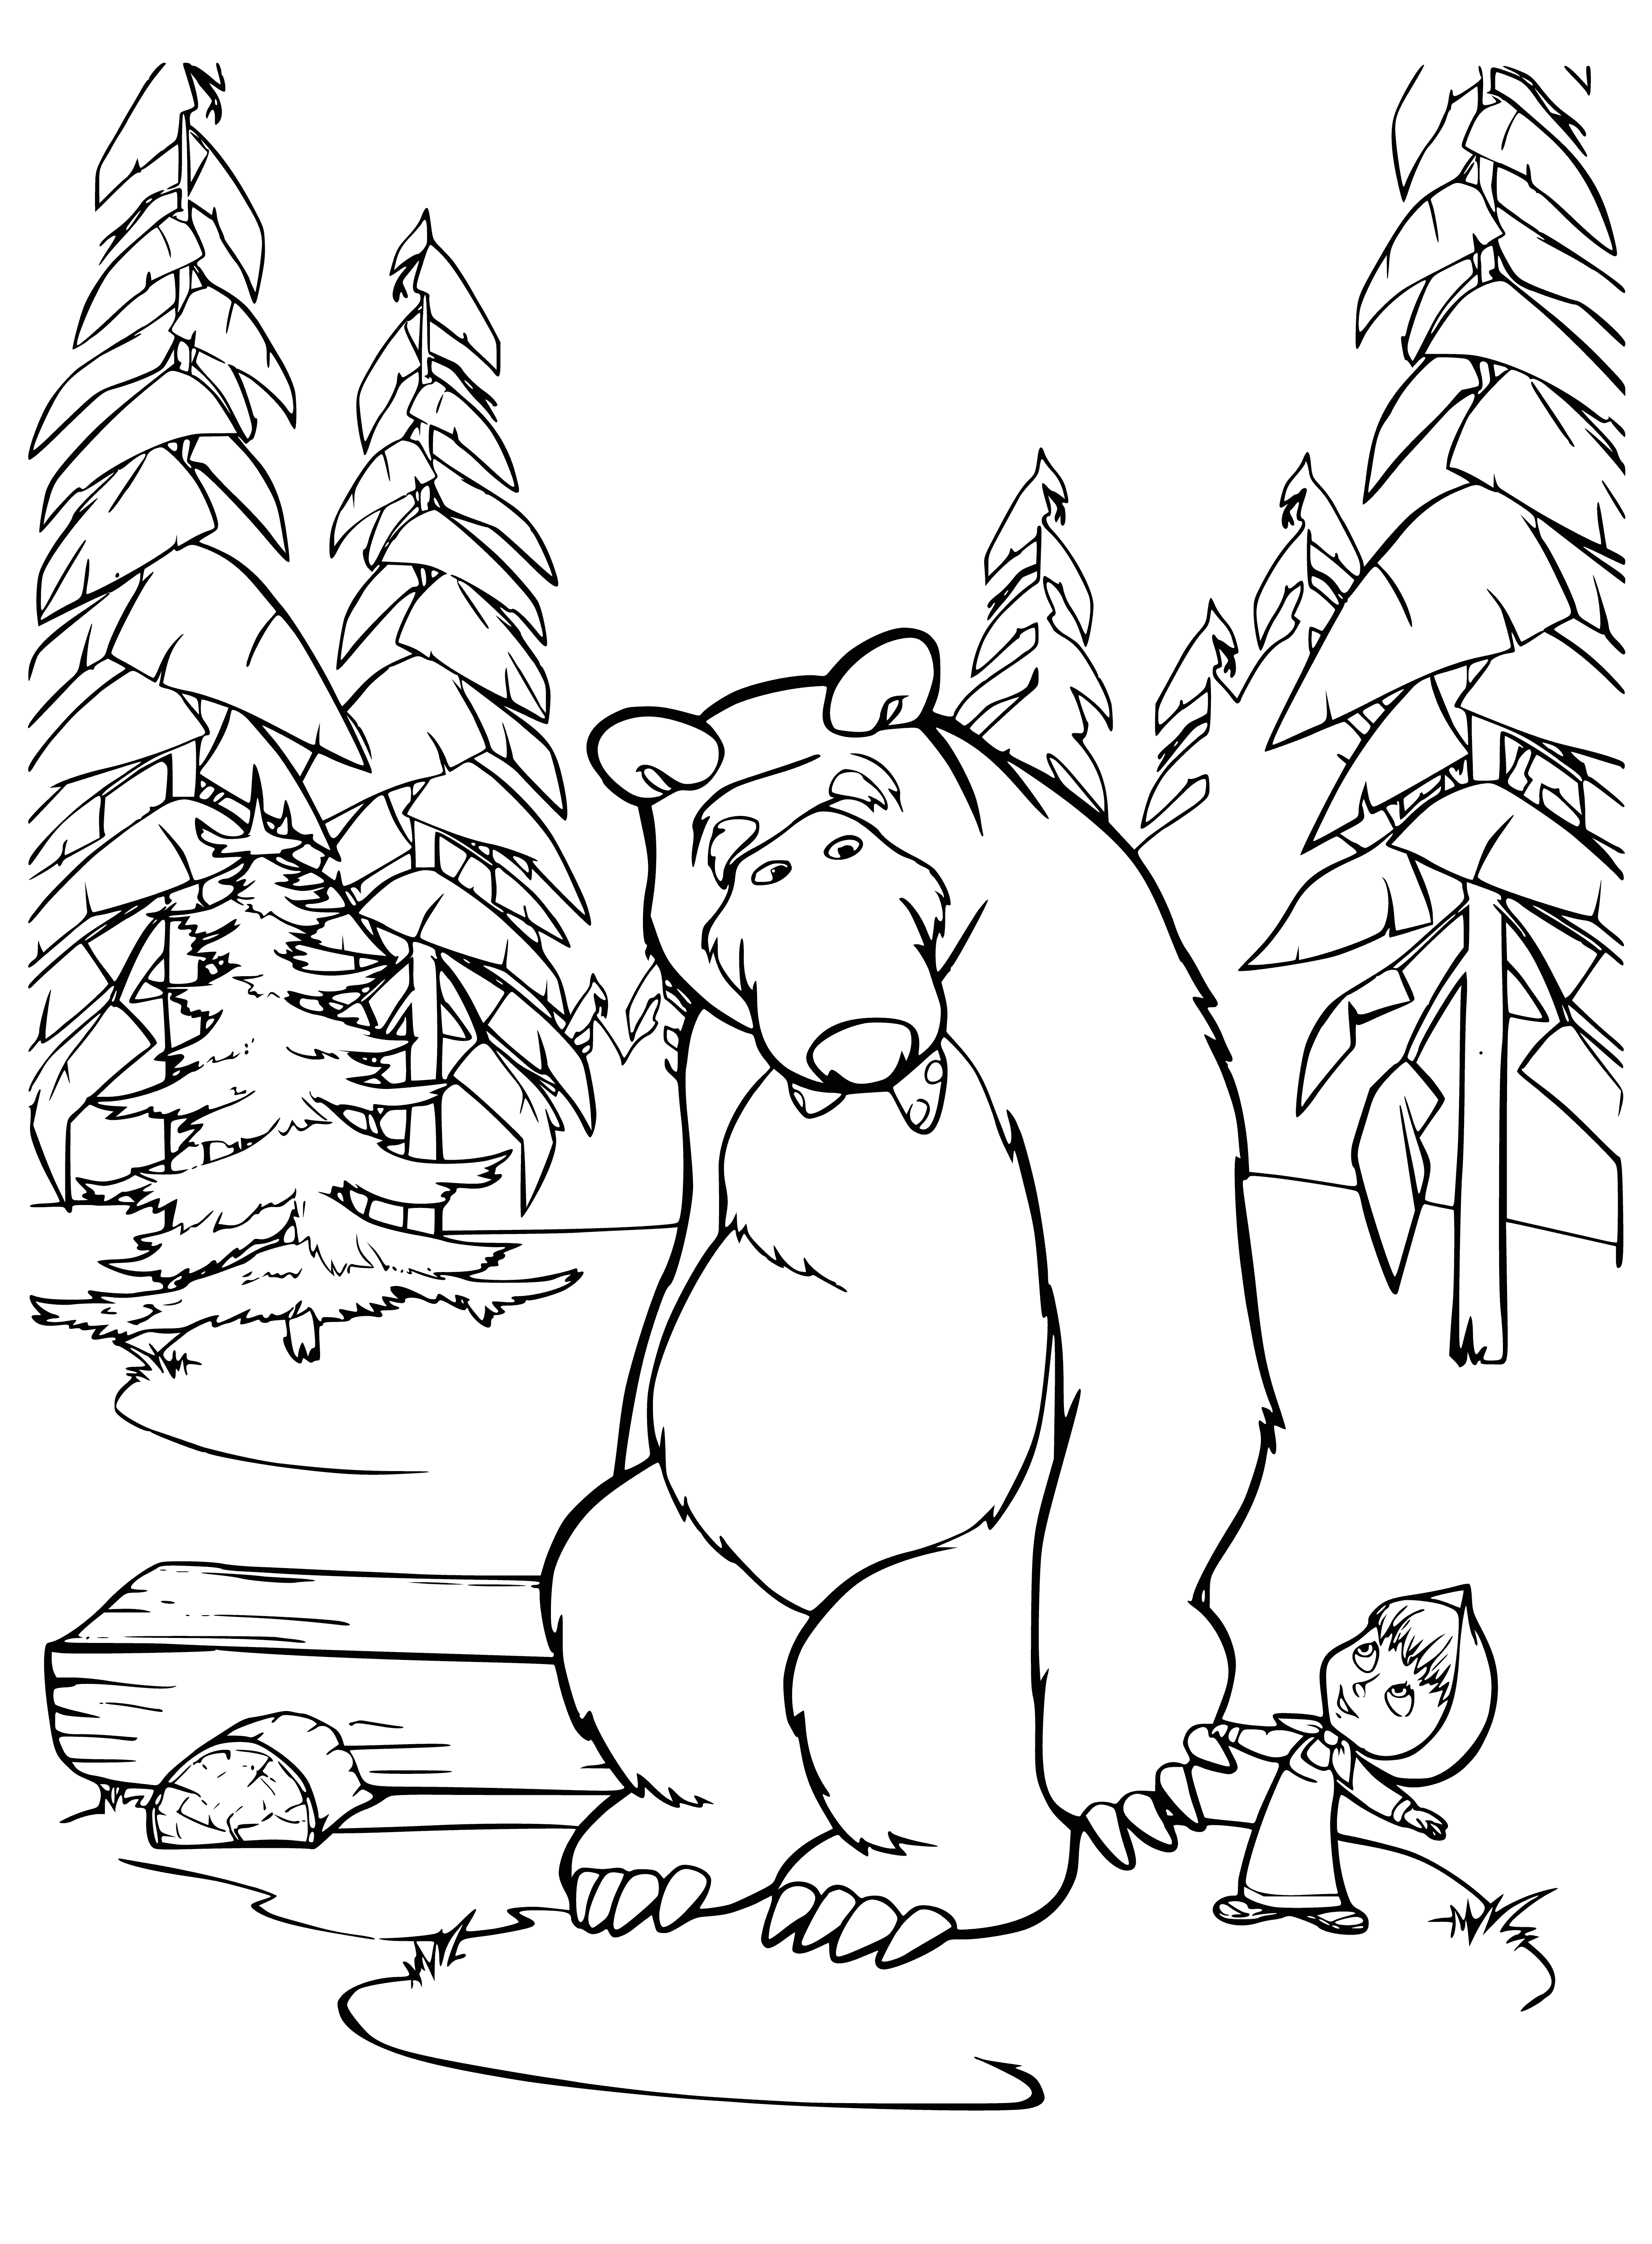 coloring page: Masha proudly displays her big catch and the Bear is impressed.